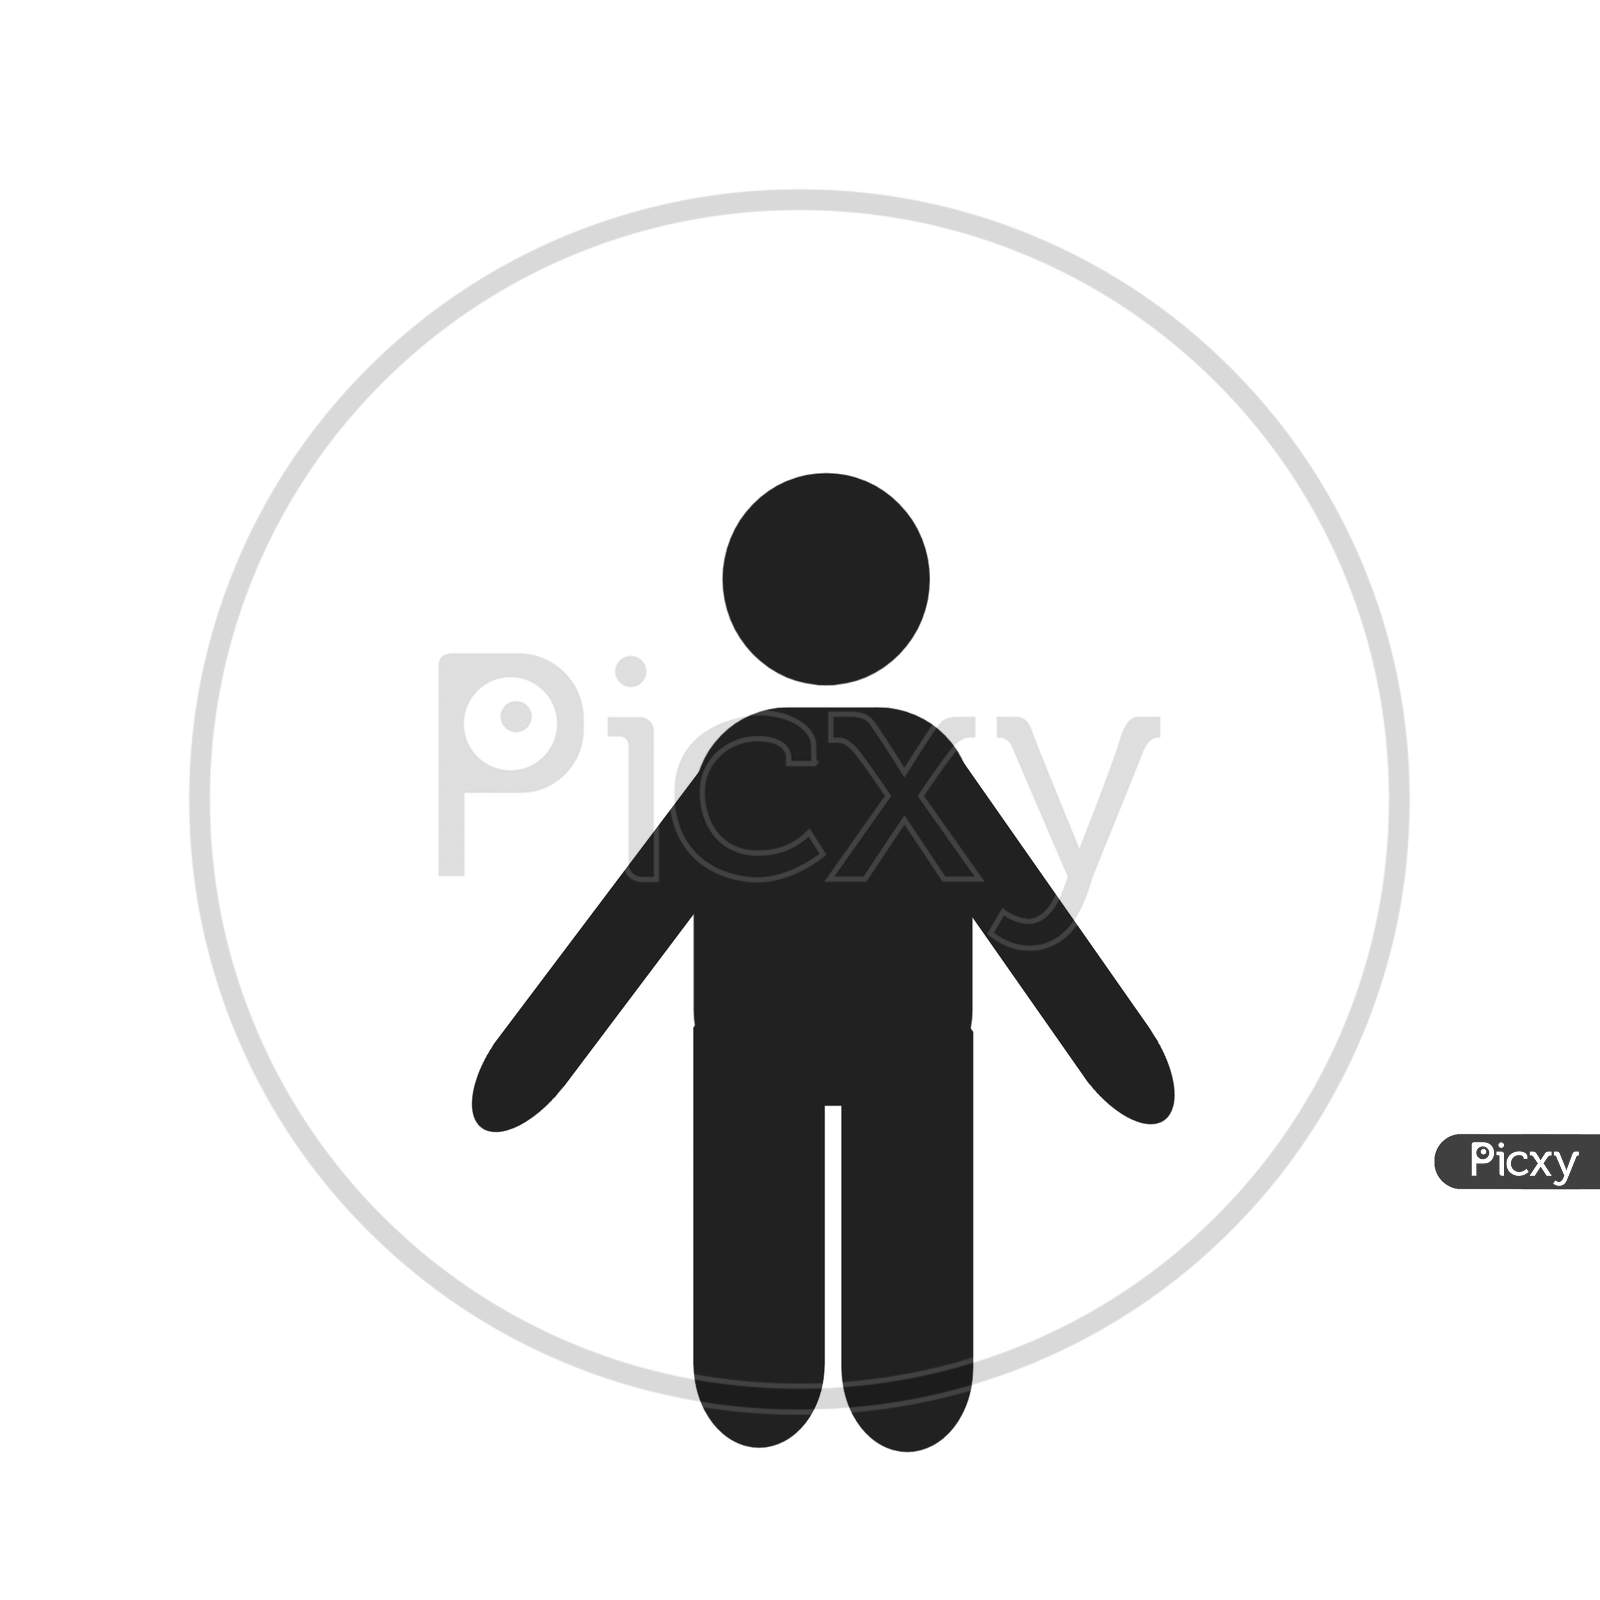 Clipart small kid icon in white background